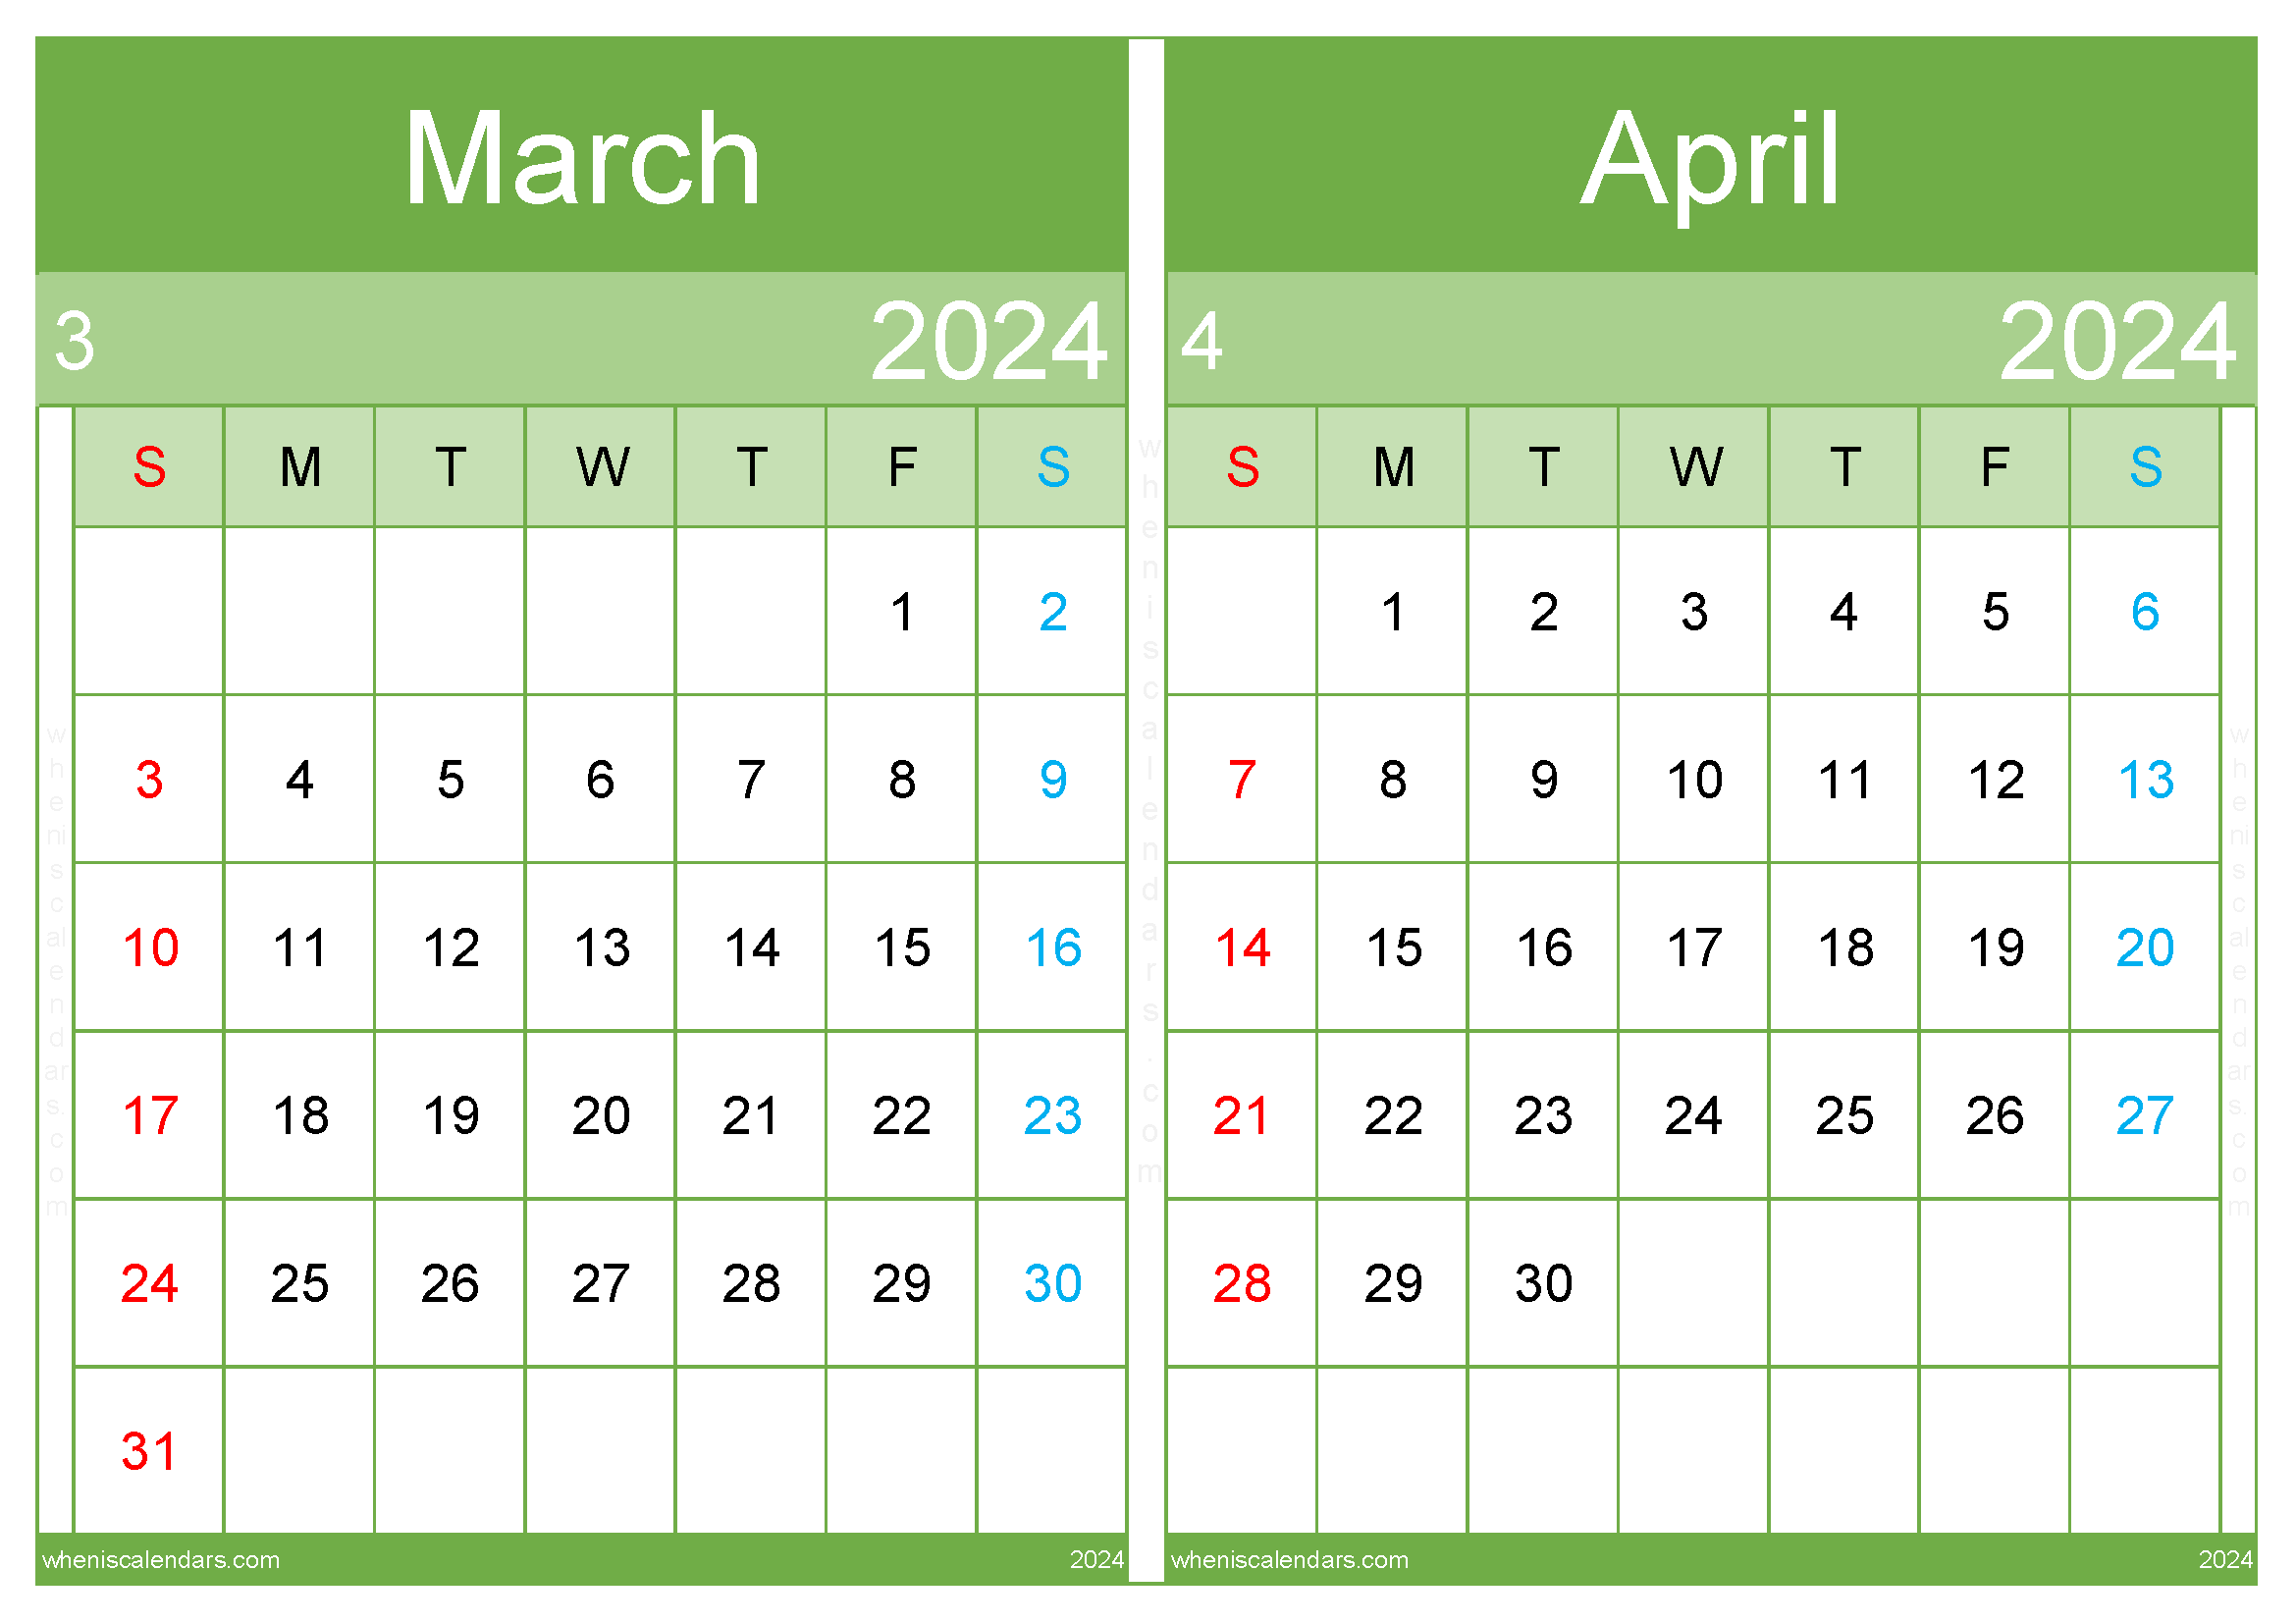 March and April Calendar Two-Month